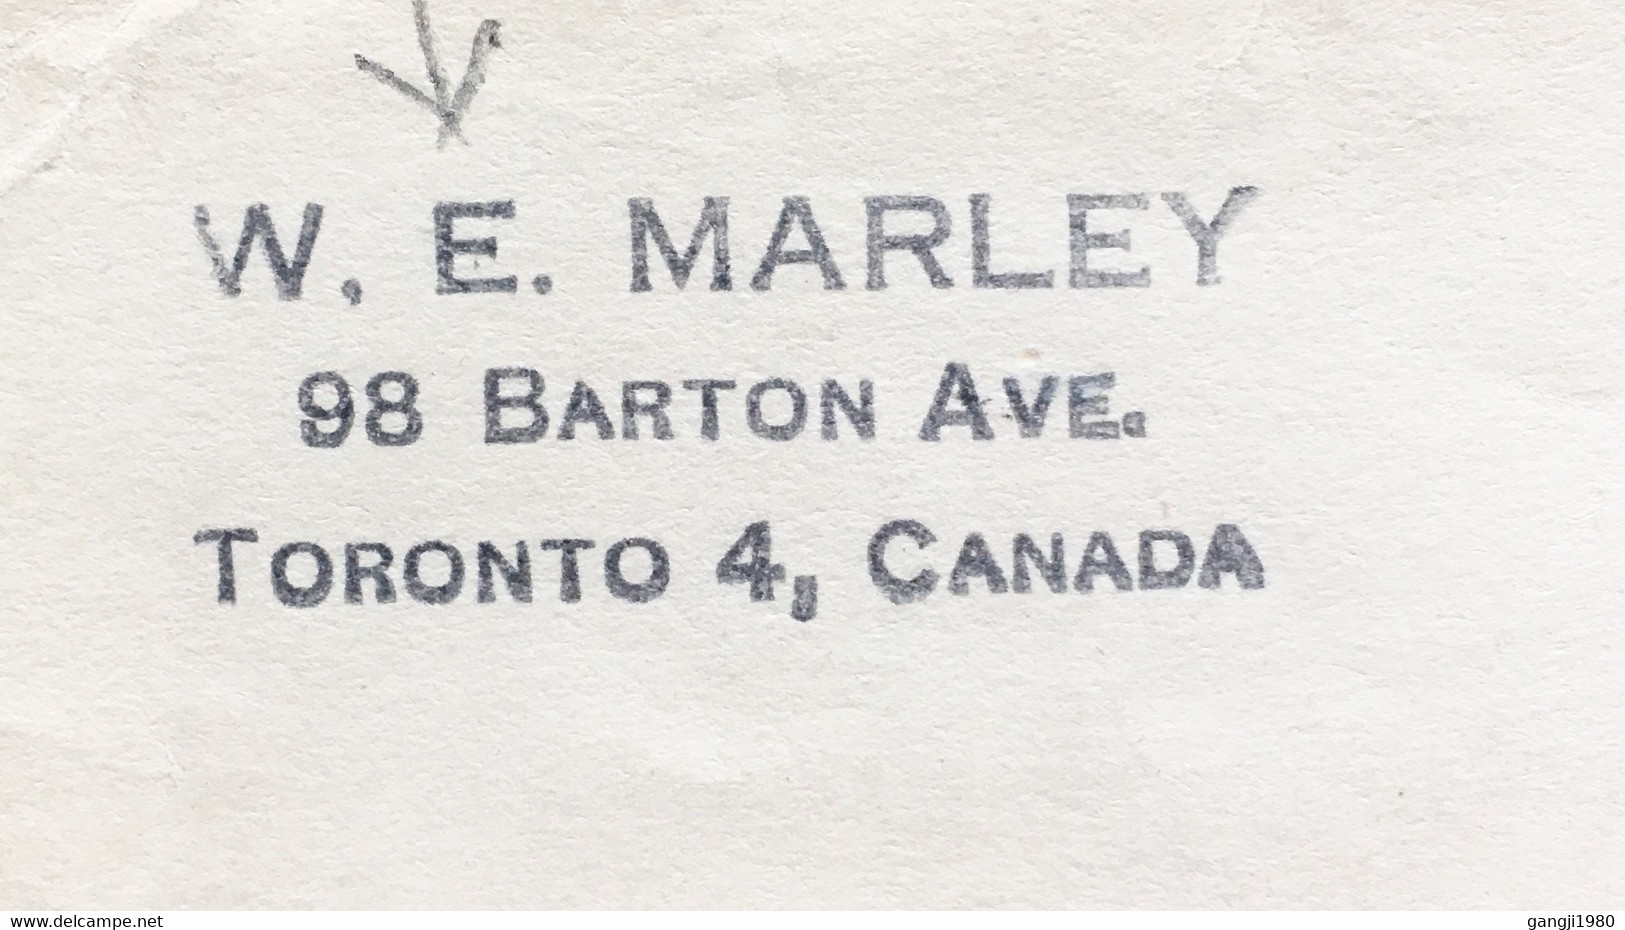 CANADA 1937, HOUSE OF ASSEMBLY CANCELLATION, POSTAL STATIONERY, KING GEORGE COVER, W. E. MARLEY TO MR. F. W. SEAMAN, USA - 1903-1954 Könige